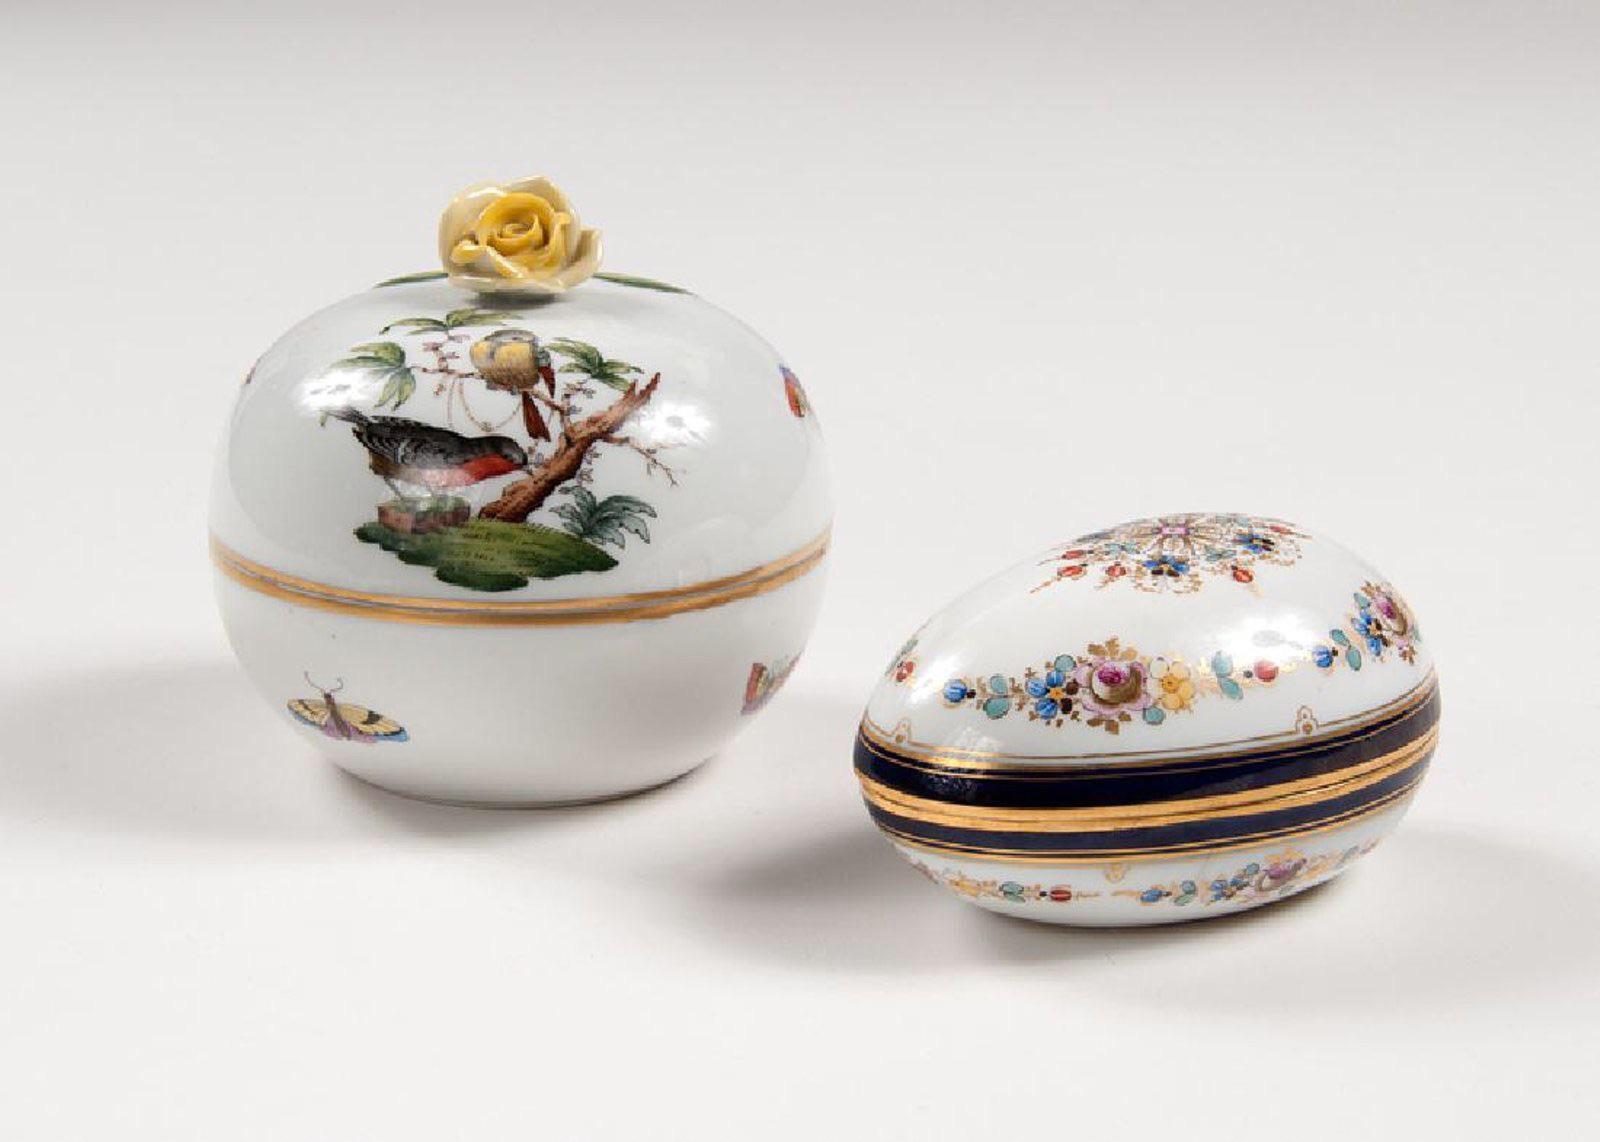 Please find and follow our 1stdibs storefront at 1stdibs dot com backslash dealers backslash Otto-Binx.   Now for more about this gorgeous piece: 
Vintage Herend porcelain figural sugar bowl with lid, birds and bees, yellow rose detail at top.